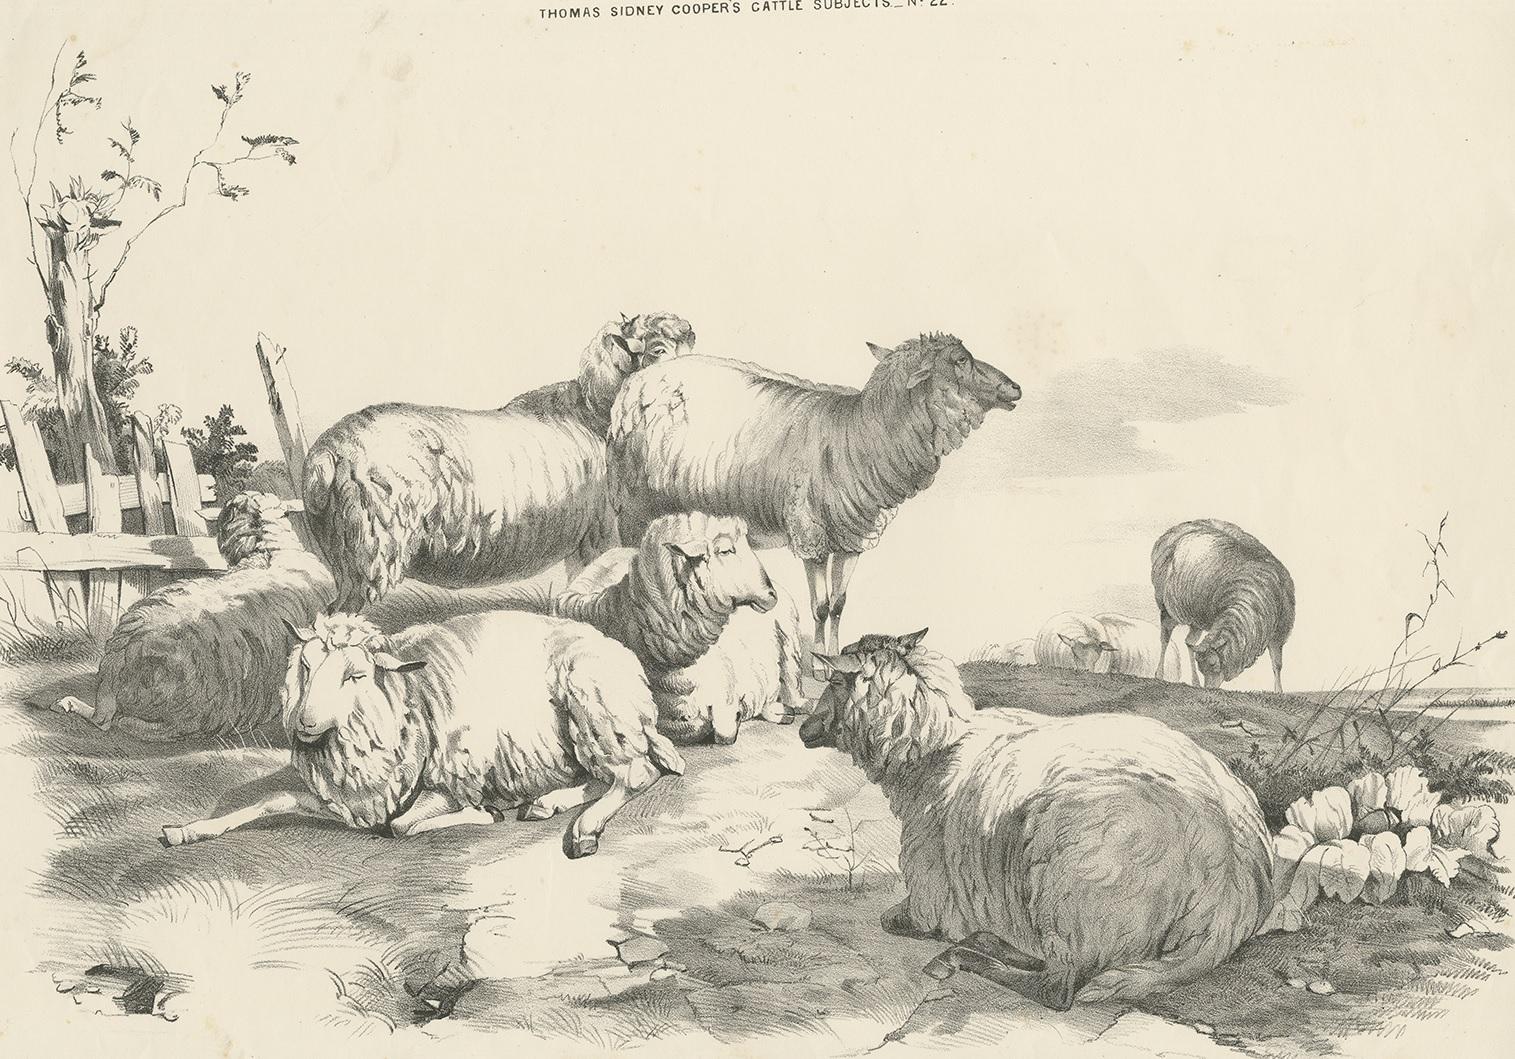 Antique print of various sheep. This print originates from 'Cattle Subjects' by Thomas Sidney Cooper. He was an English landscape painter noted for his images of cattle and farm animals.